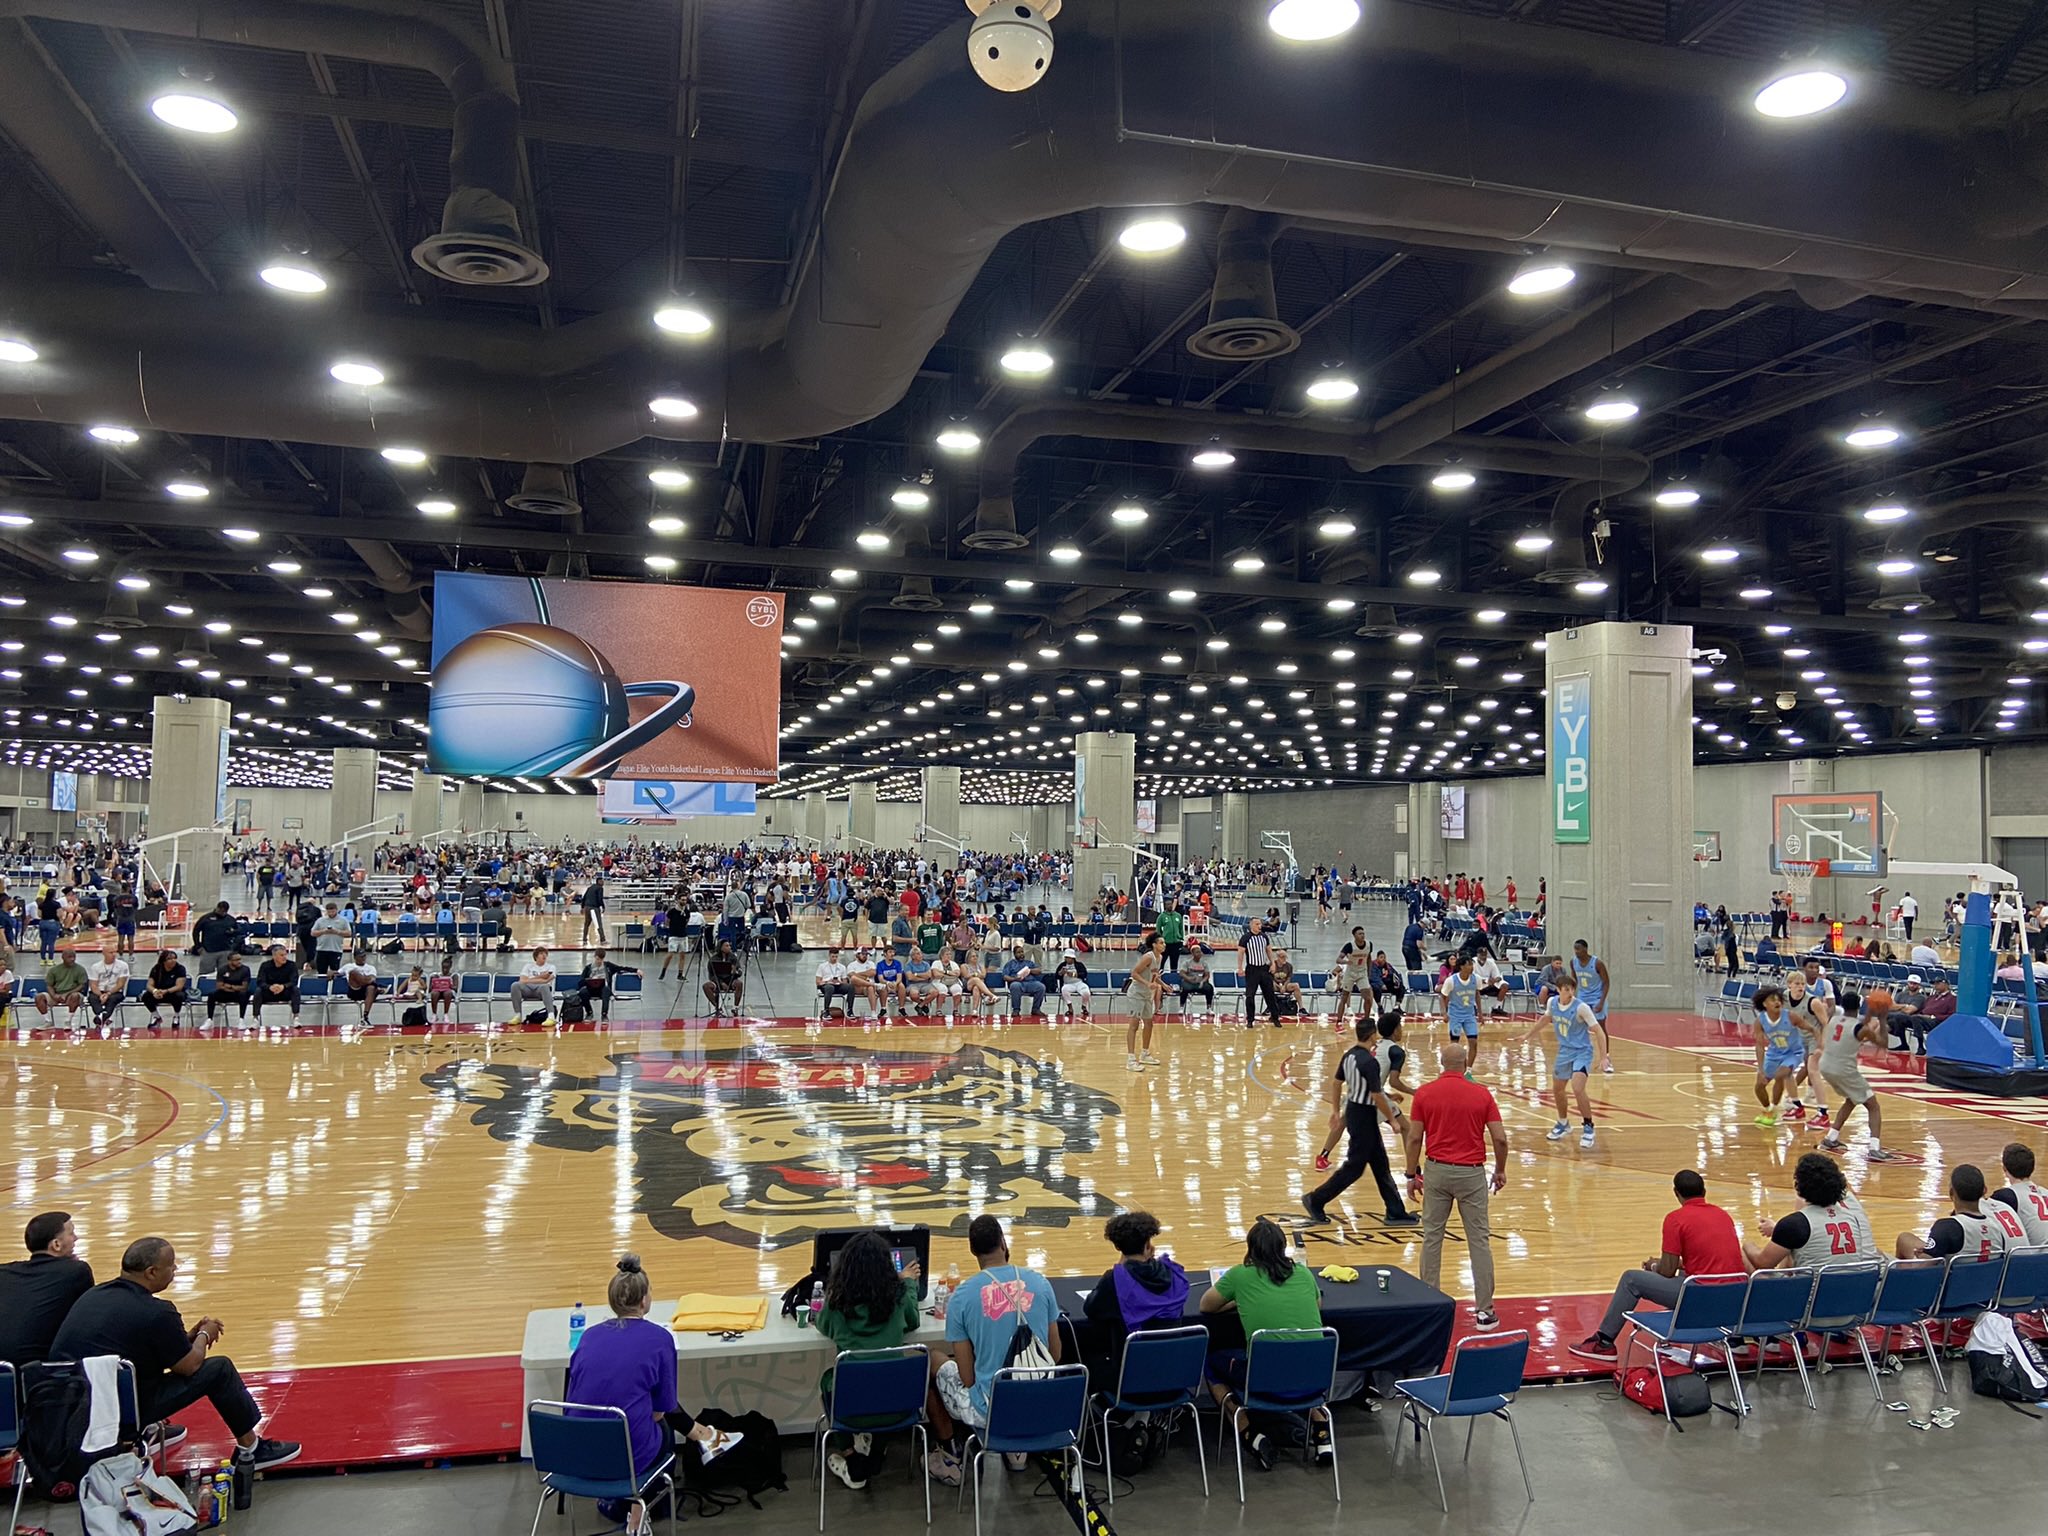 Cameron Drummond on X: Back out at the Kentucky Expo Center in Louisville  today for Day 2 of the Nike EYBL Louisville session. Always cool to see  which former college courts have